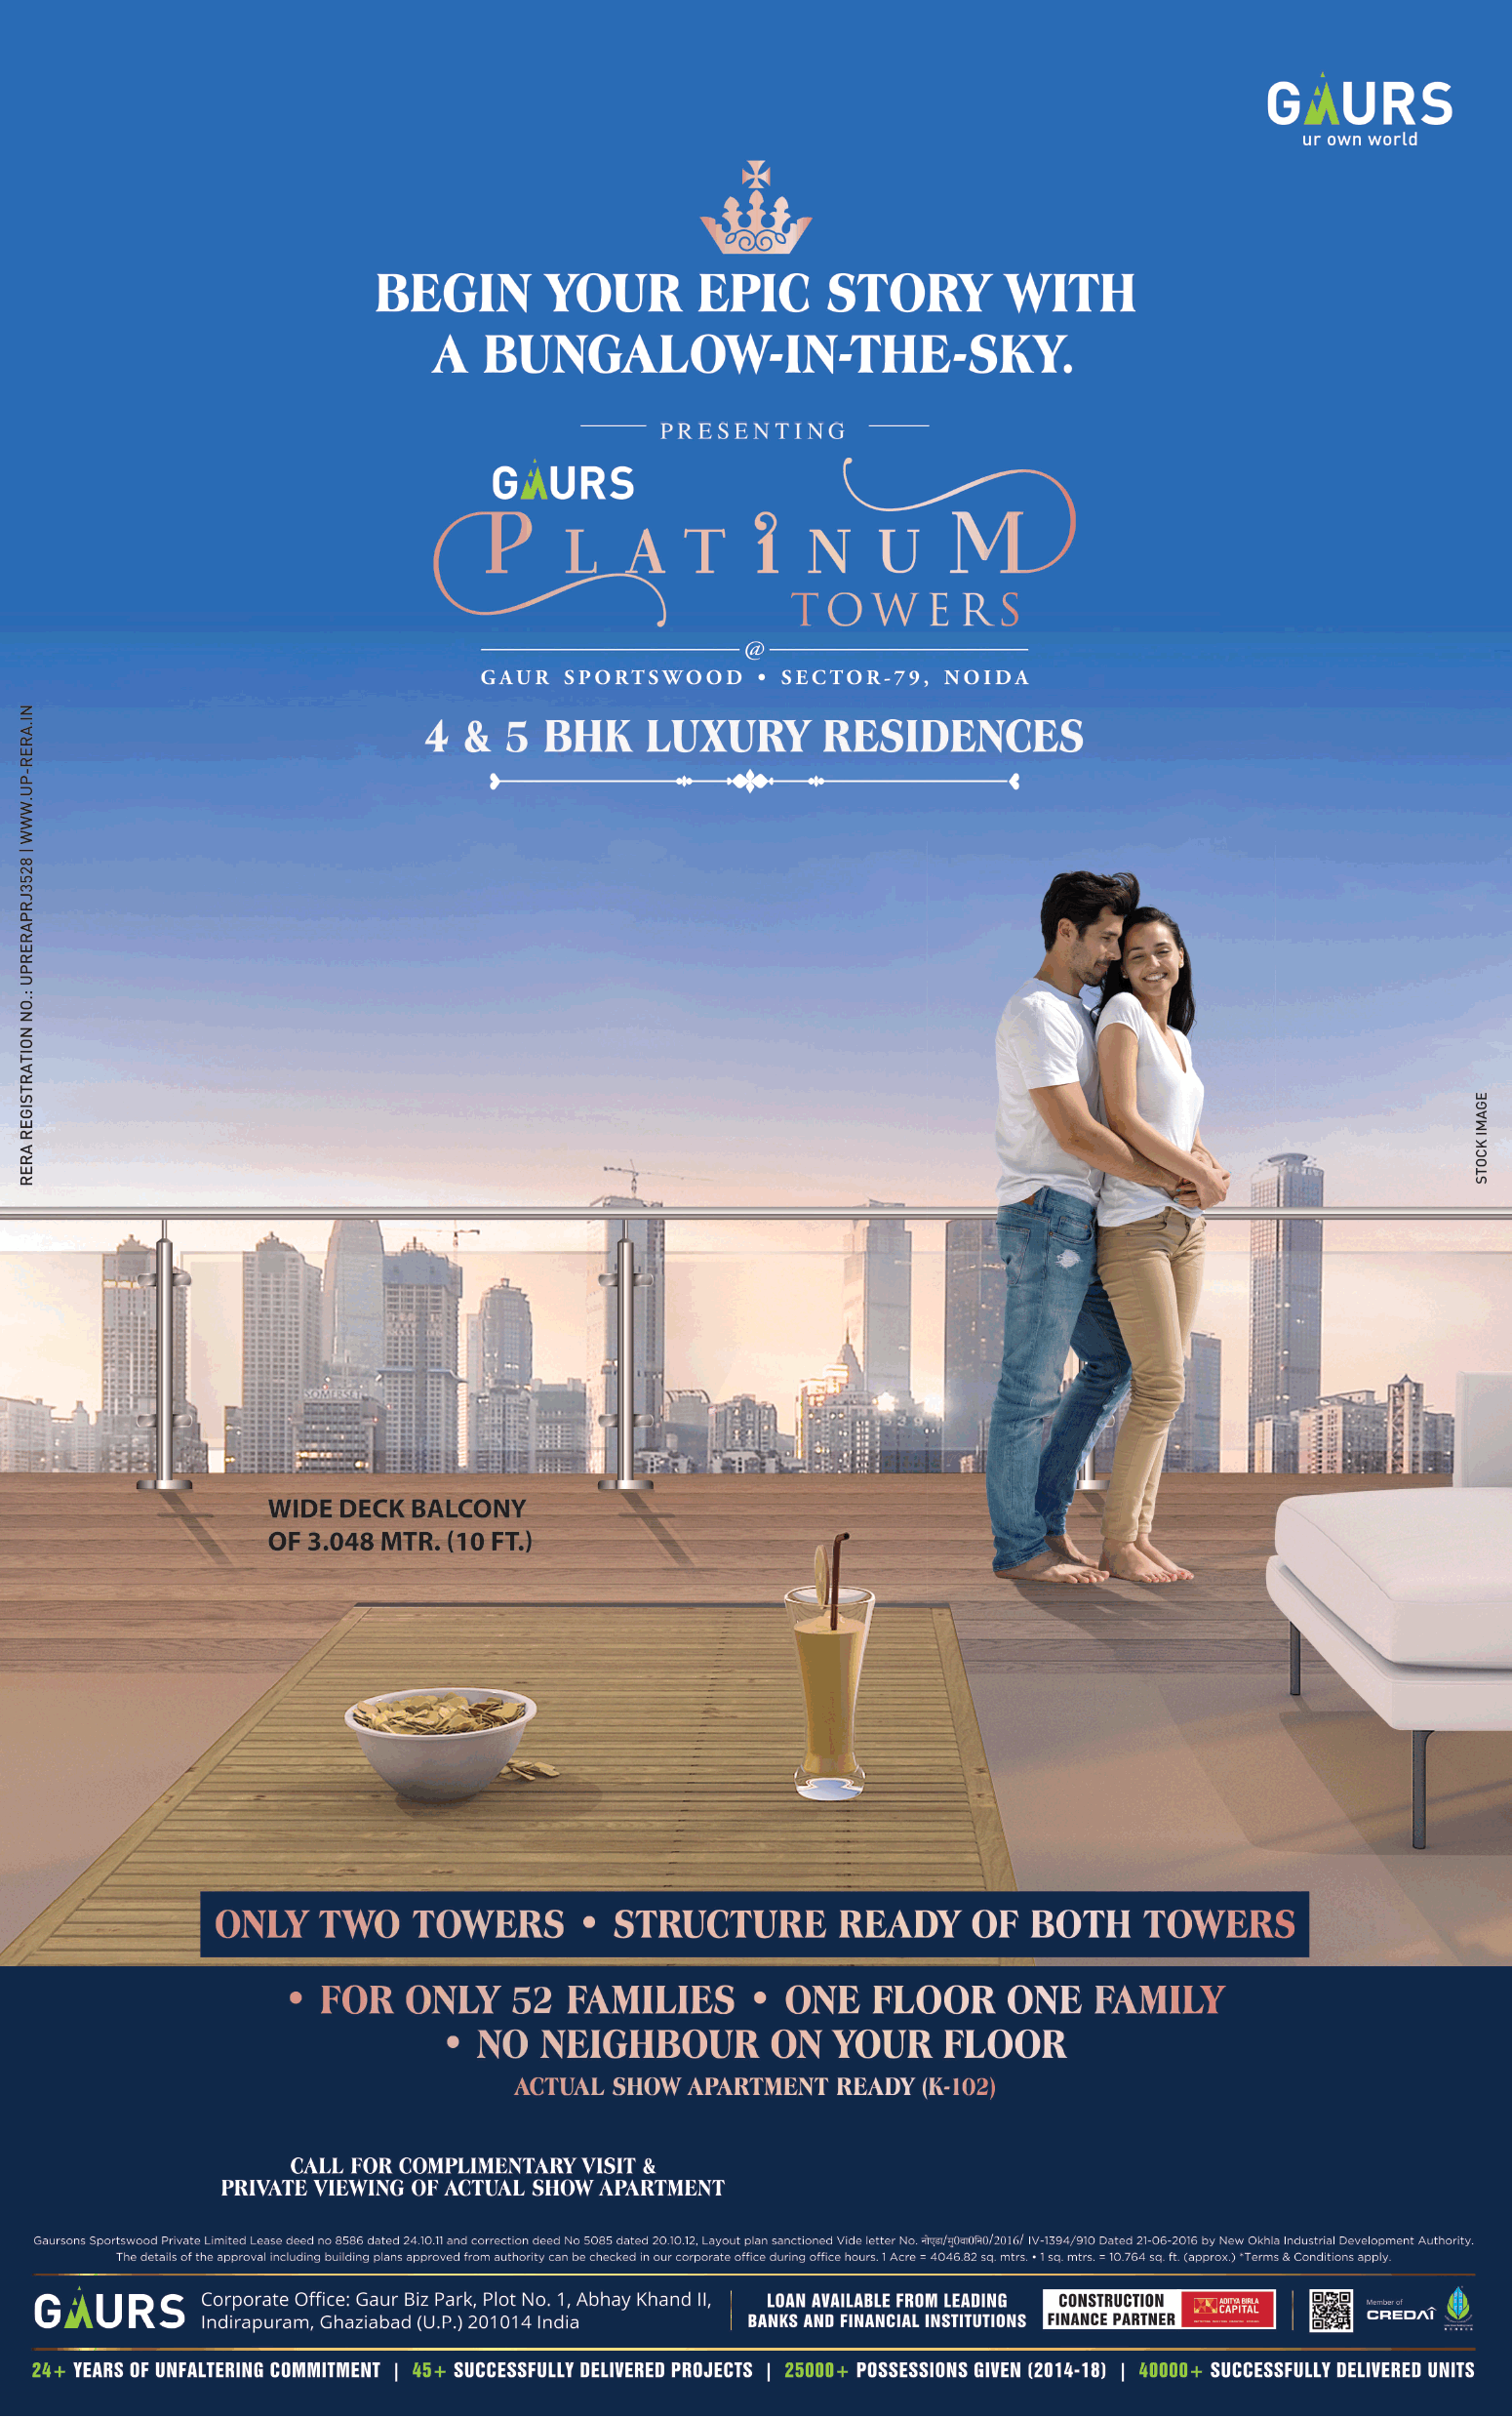 Begin your epic story with a bungalow-in-the-sky at Gaurs Platinum Towers in Sector 79, Noida Update